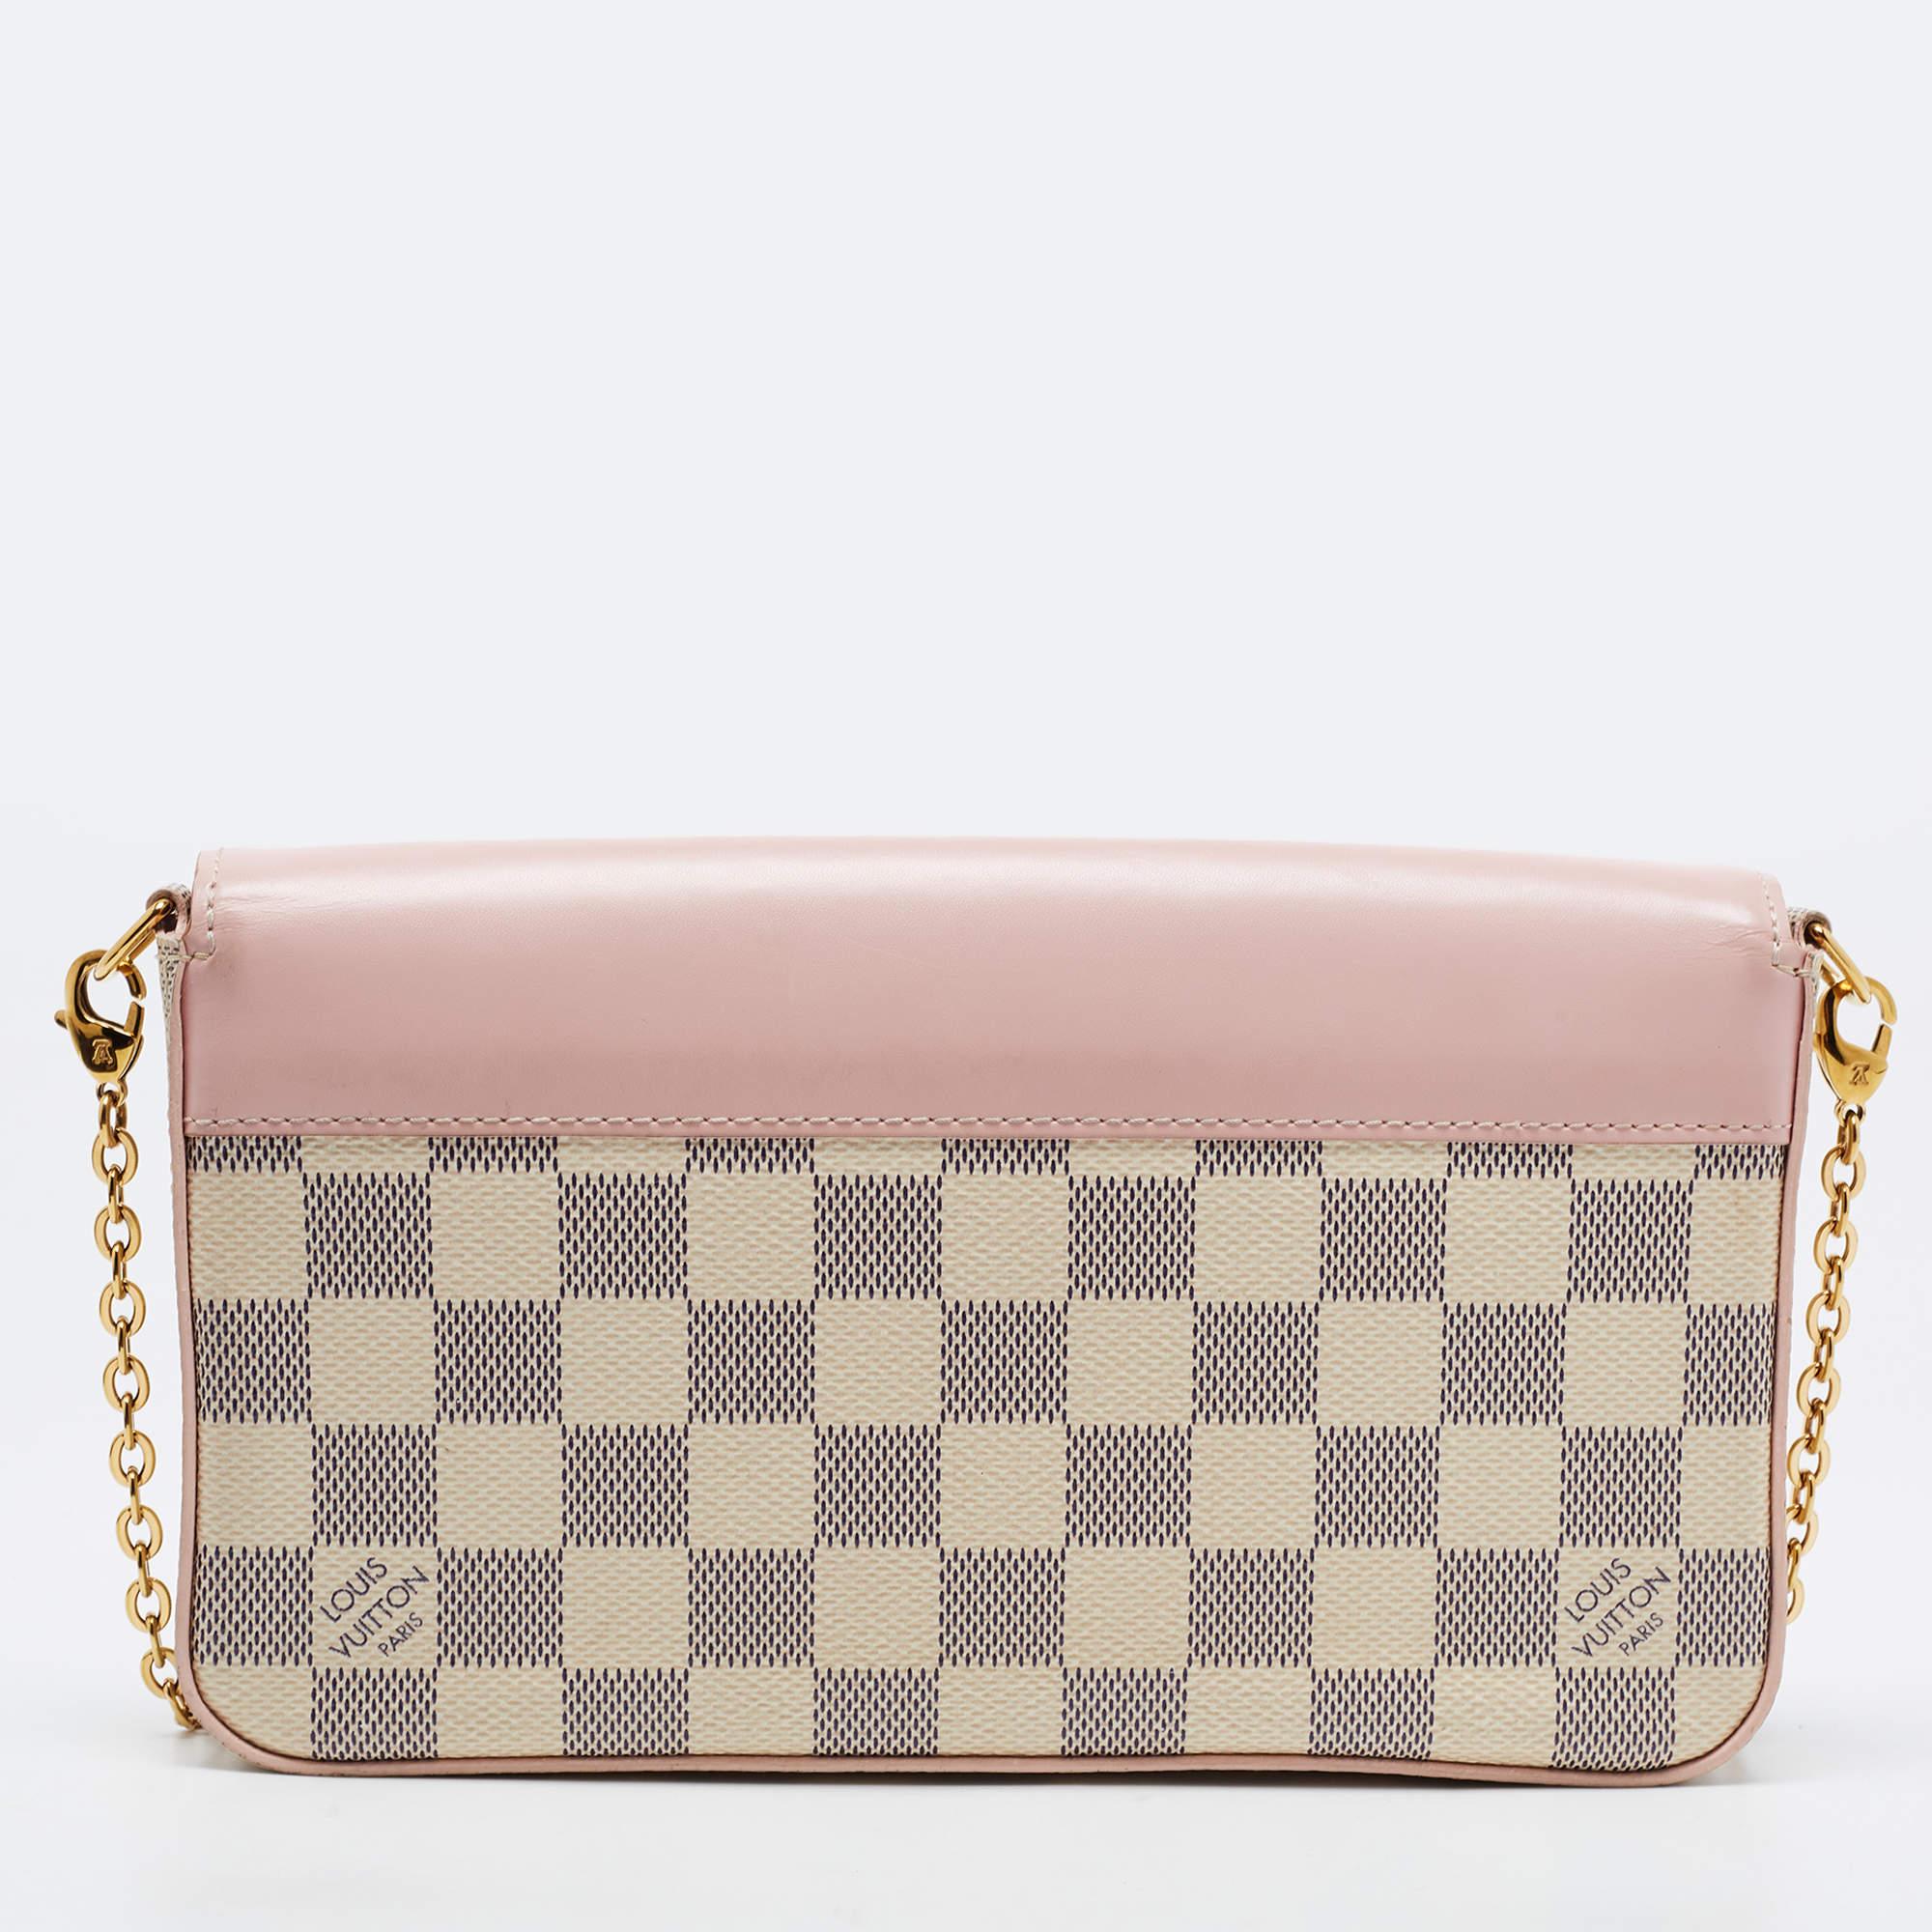 This Pochette Felicie has been designed to be a shoulder bag as well as a clutch. It is crafted from signature Damier Azur coated canvas as well as leather, and it has a fabric-lined interior. The bag comes in a convenient size that you can easily